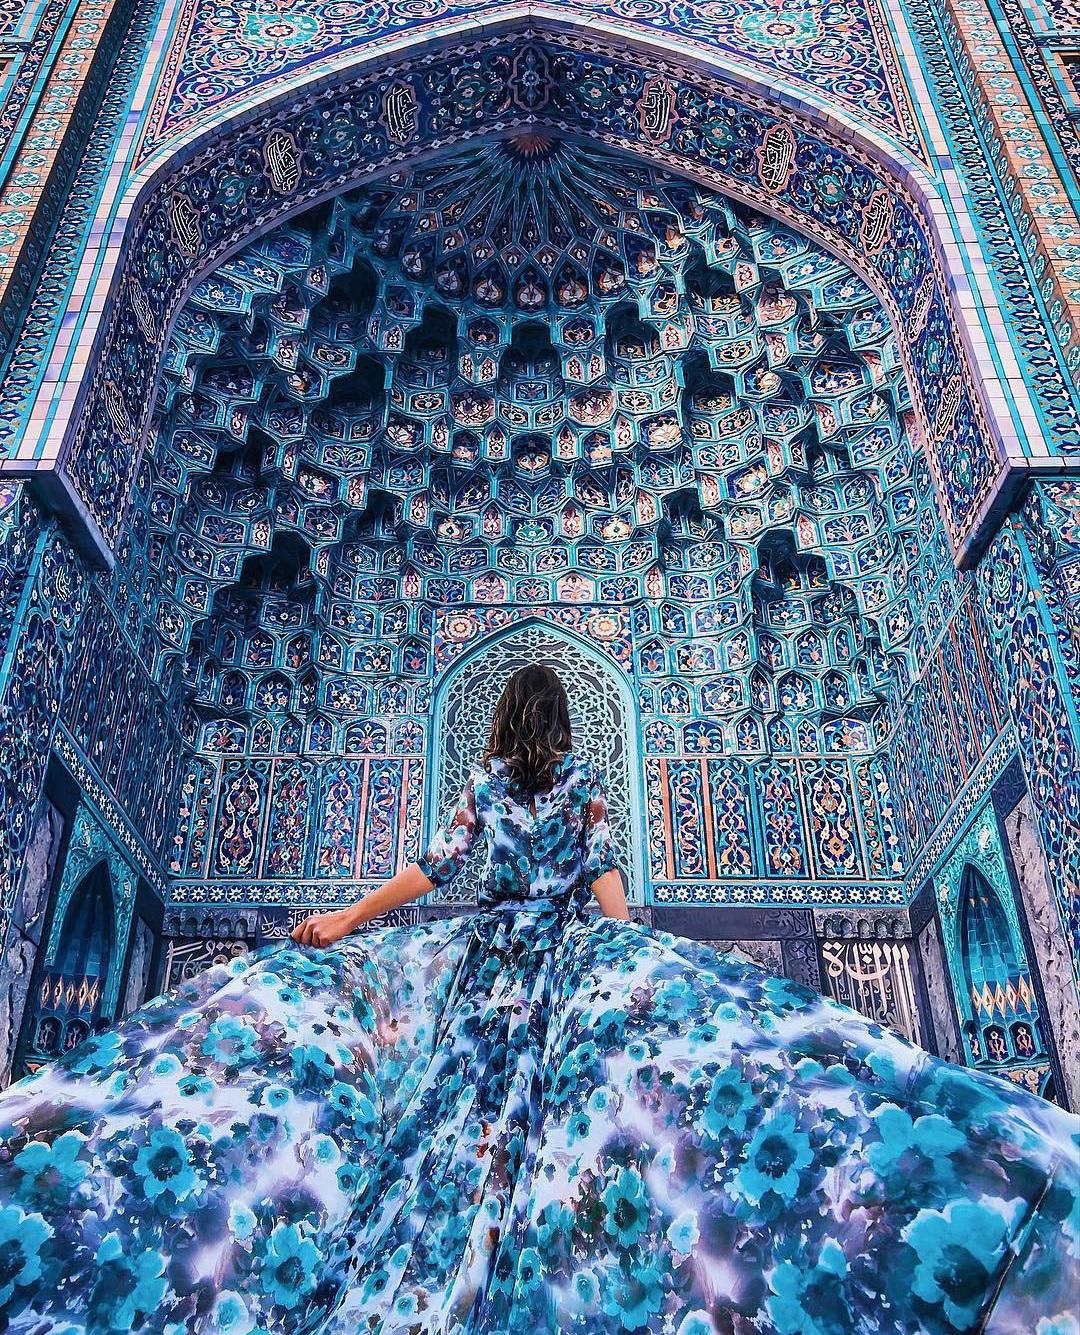 The Saint Petersburg Mosque, Russia photographed by Kristina Makeeva. Reposting to add credit